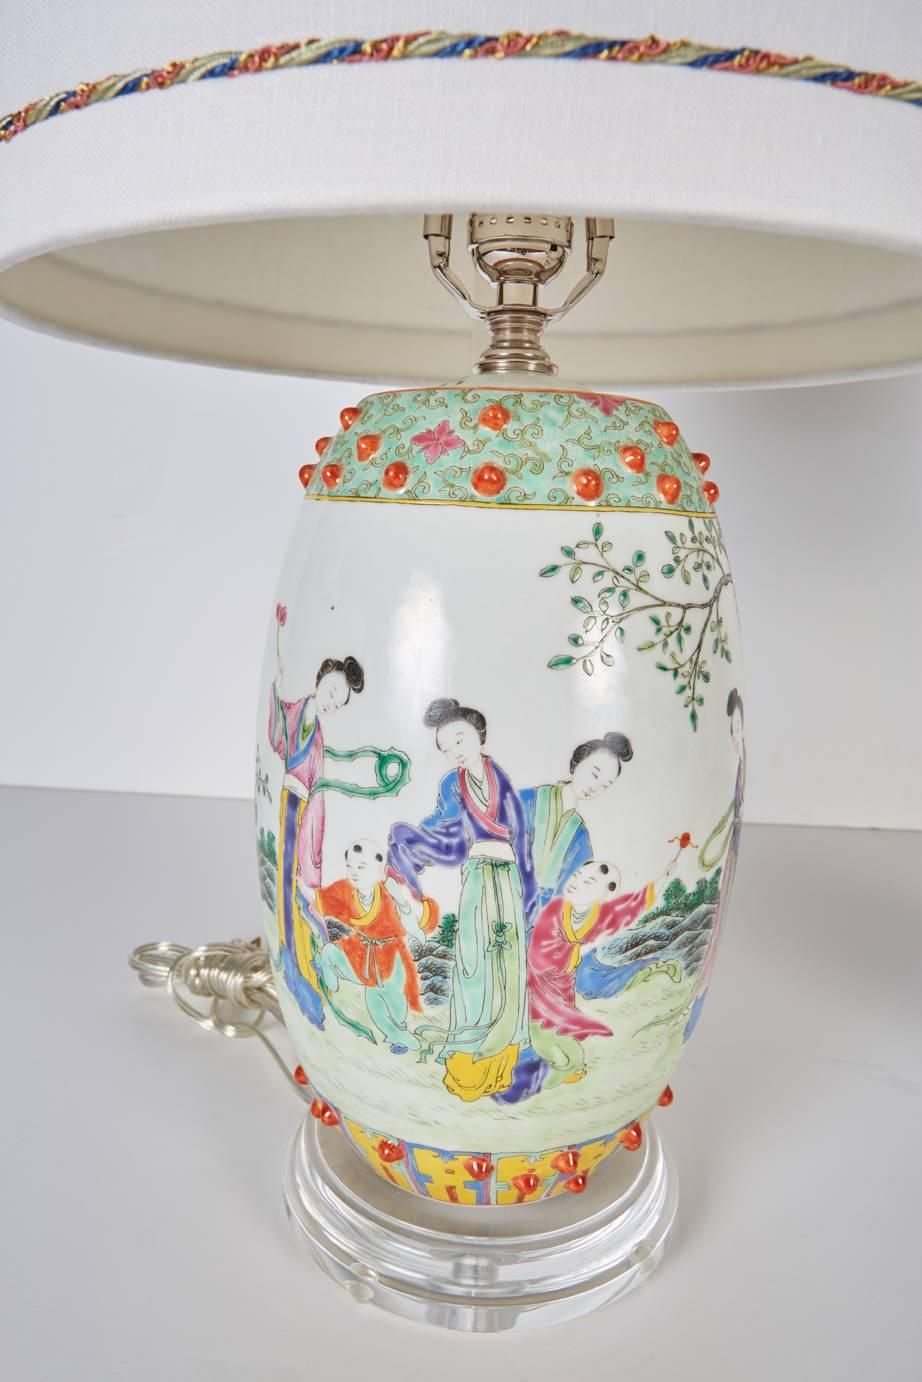 Pair of vintage Chinese porcelain drum shaped decorative porcelains now custom mounted as lamps with custom shades. Porcelains rest on custom Lucite bases. Custom shades are in white silk trimmed with blue, celadon, coral and metallic gold colored